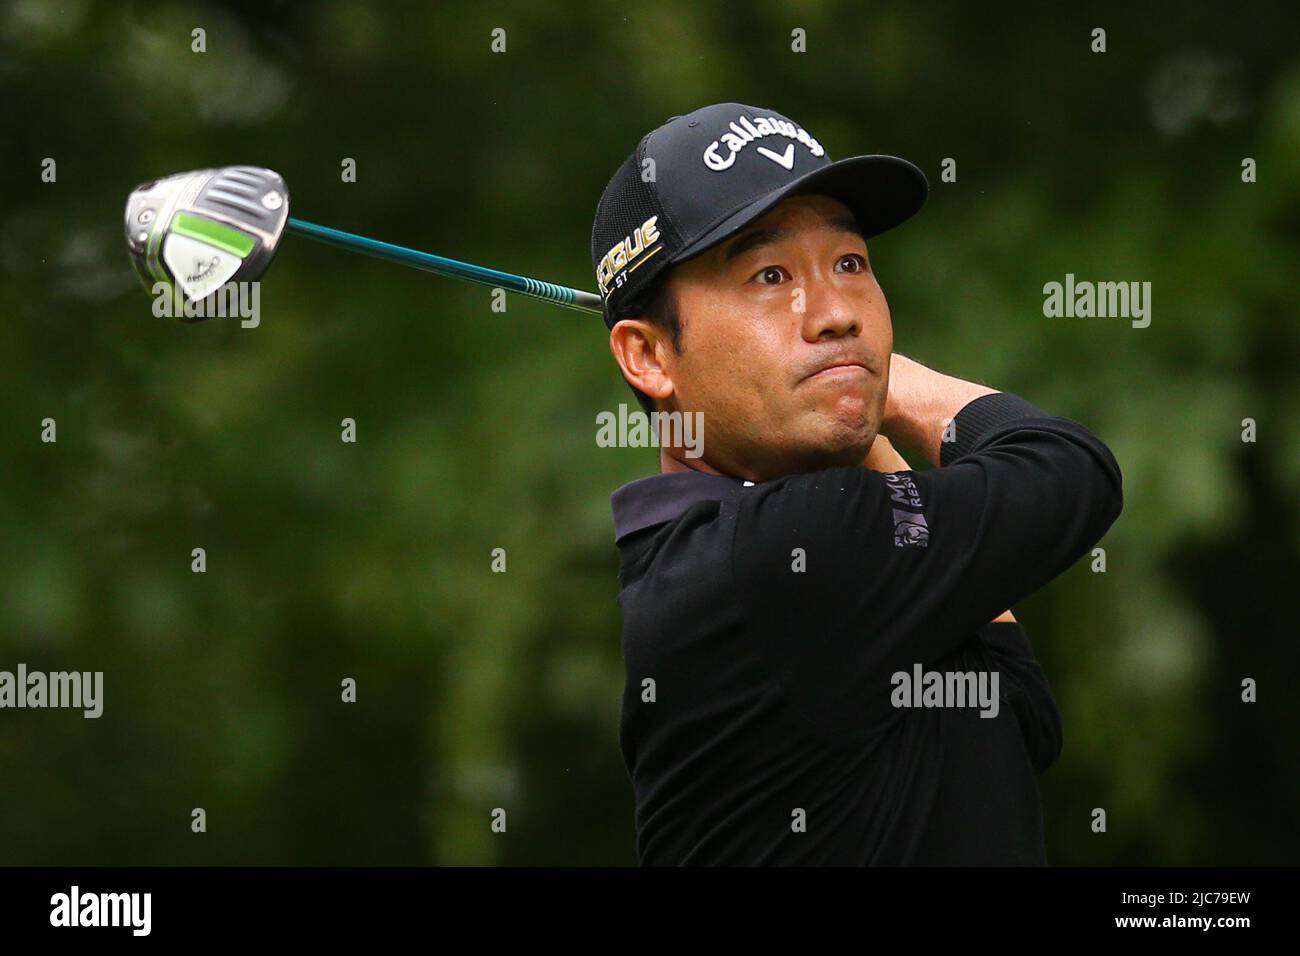 ST ALBANS, ENGLAND - JUNE 09: Kevin Na of the United States tees off on the 4th hole during day one of the LIV Golf Invitational at The Centurion Club on June 9, 2022 in St Albans, England. (MB Media) Stock Photo